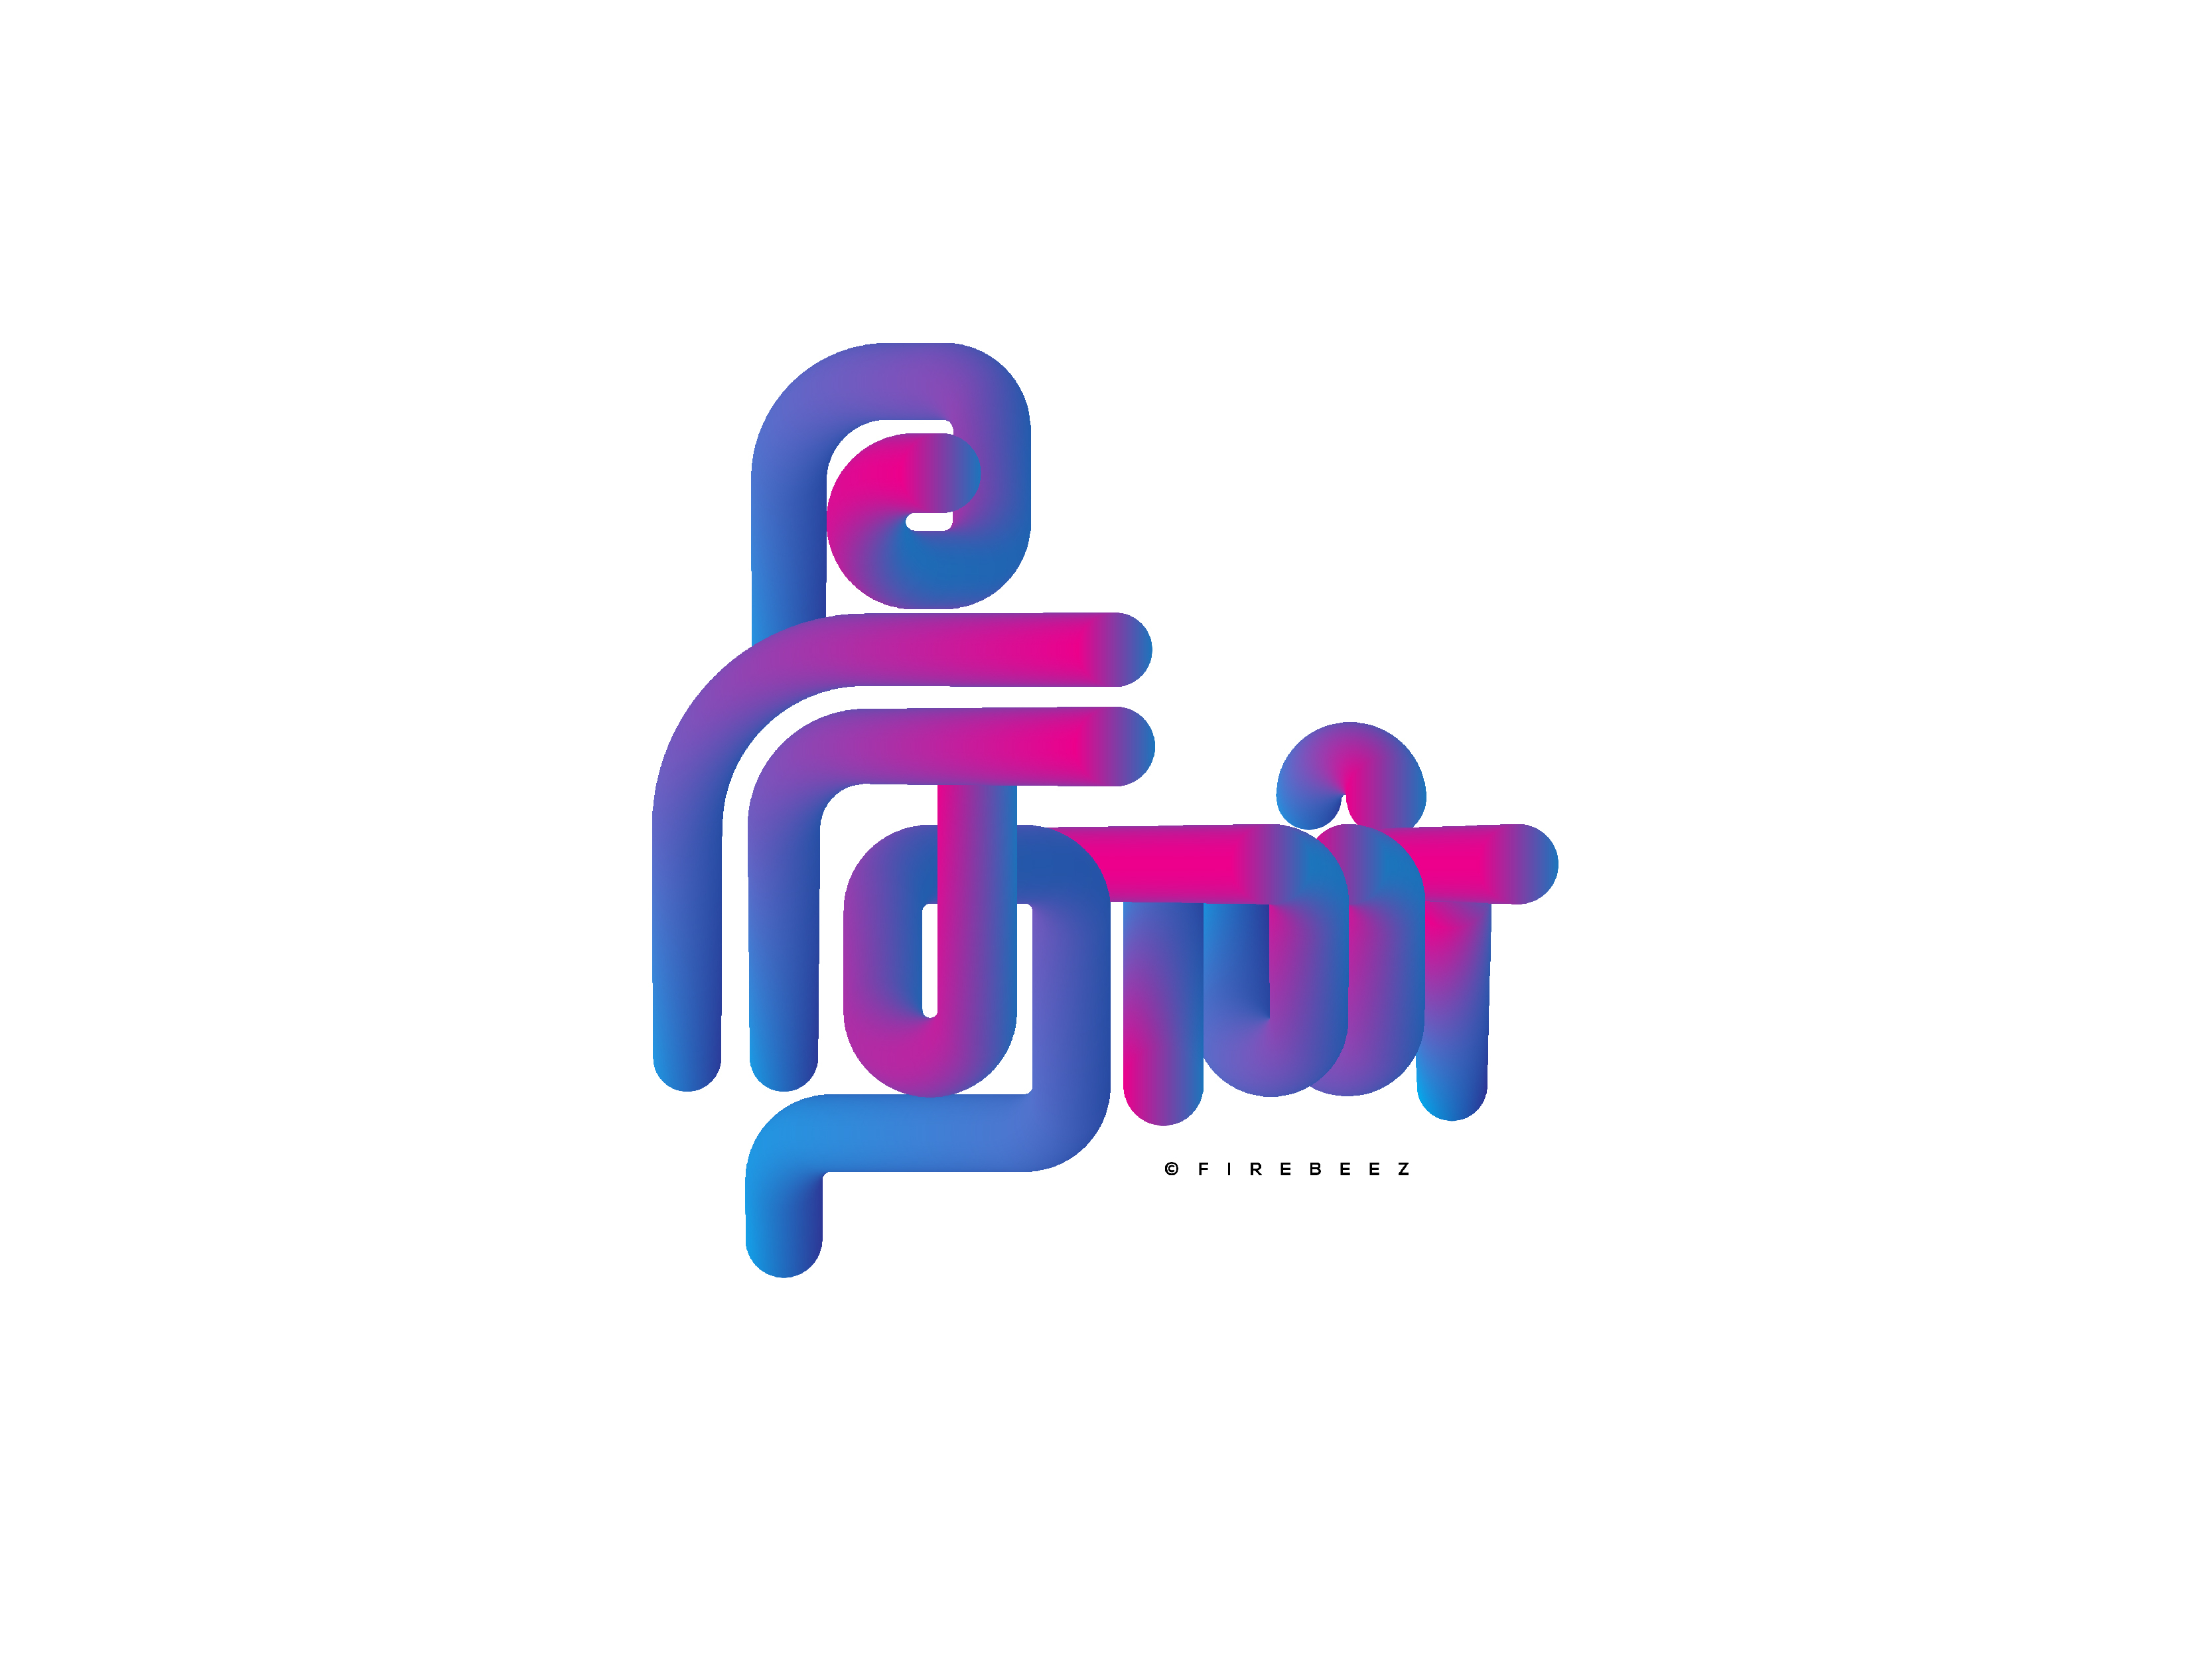 Tamil Graphic Projects :: Photos, videos, logos, illustrations and branding  :: Behance